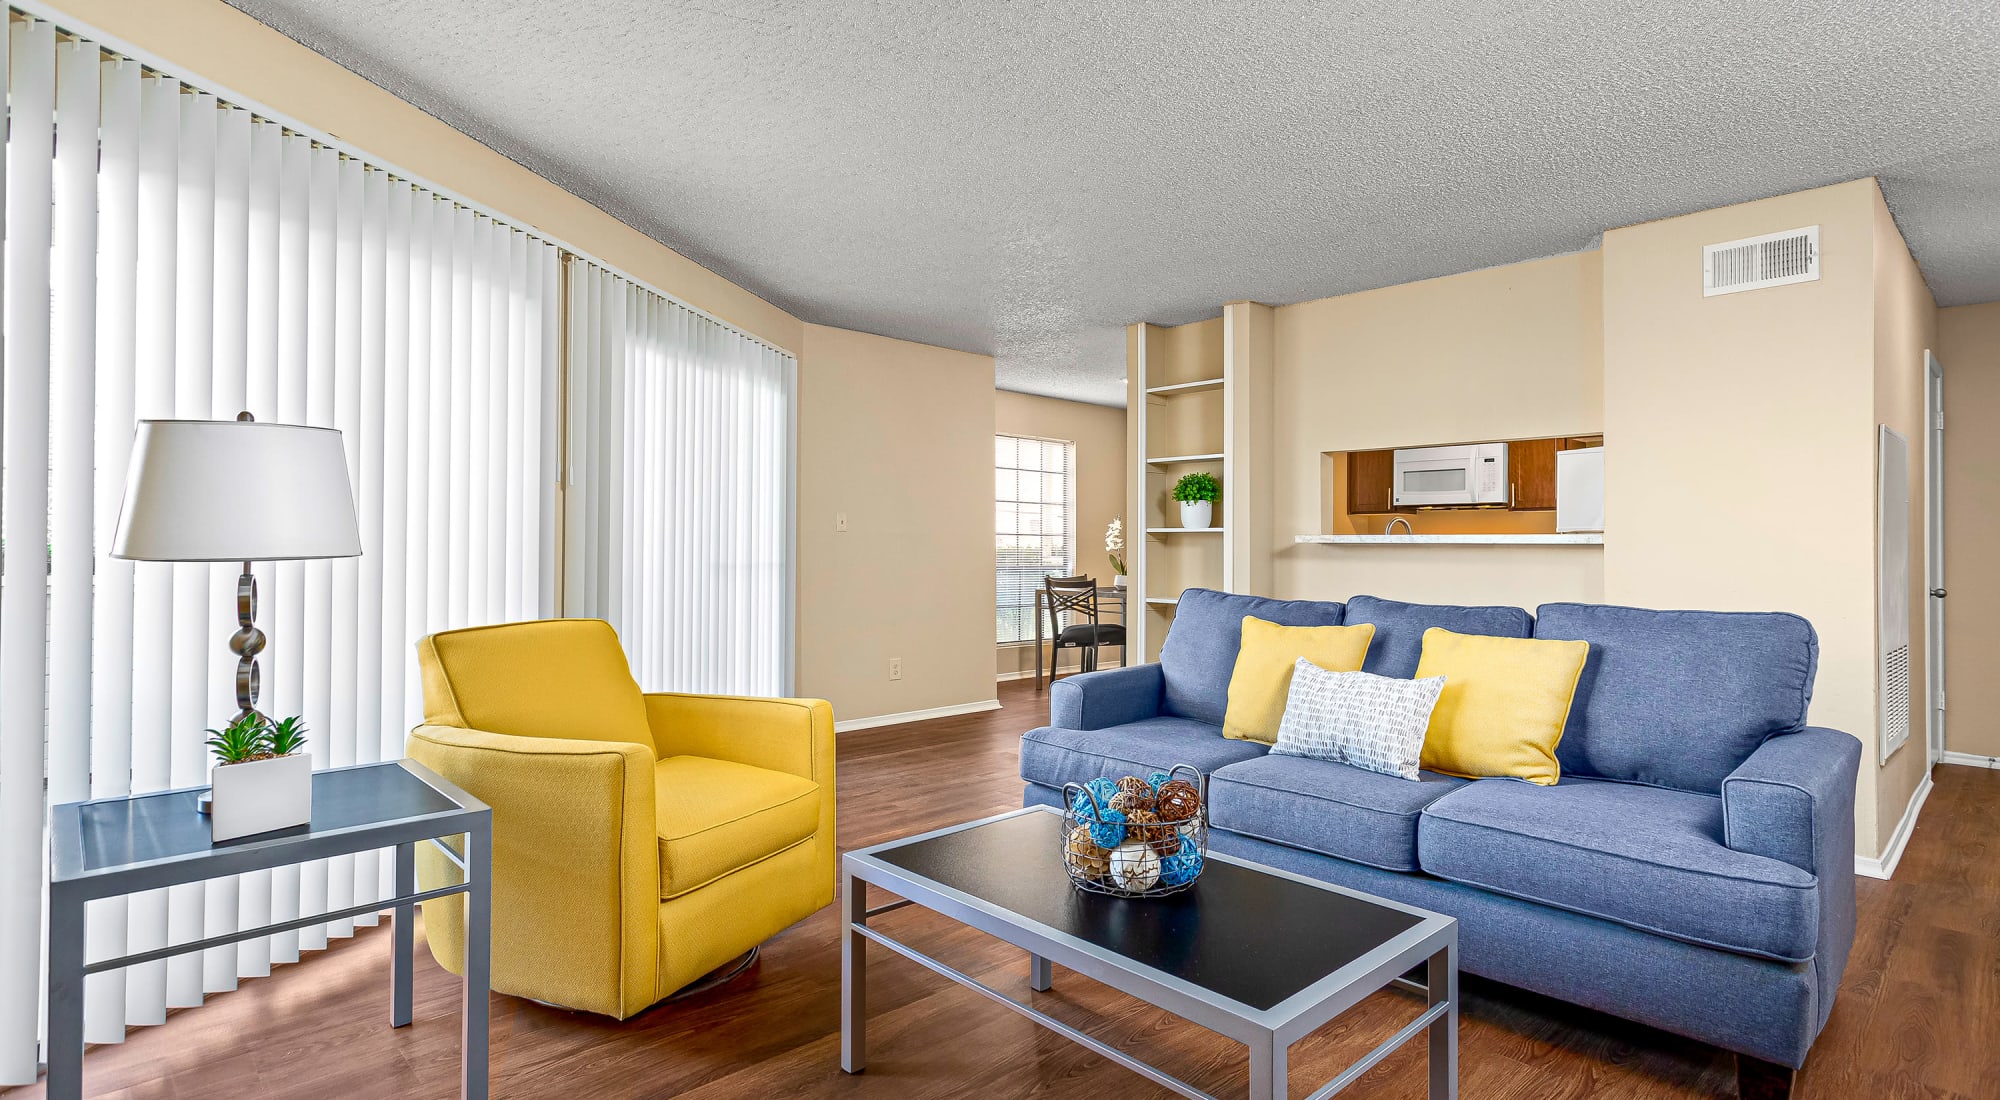 Living Room at Stoneybrook Apartments and Townhomes